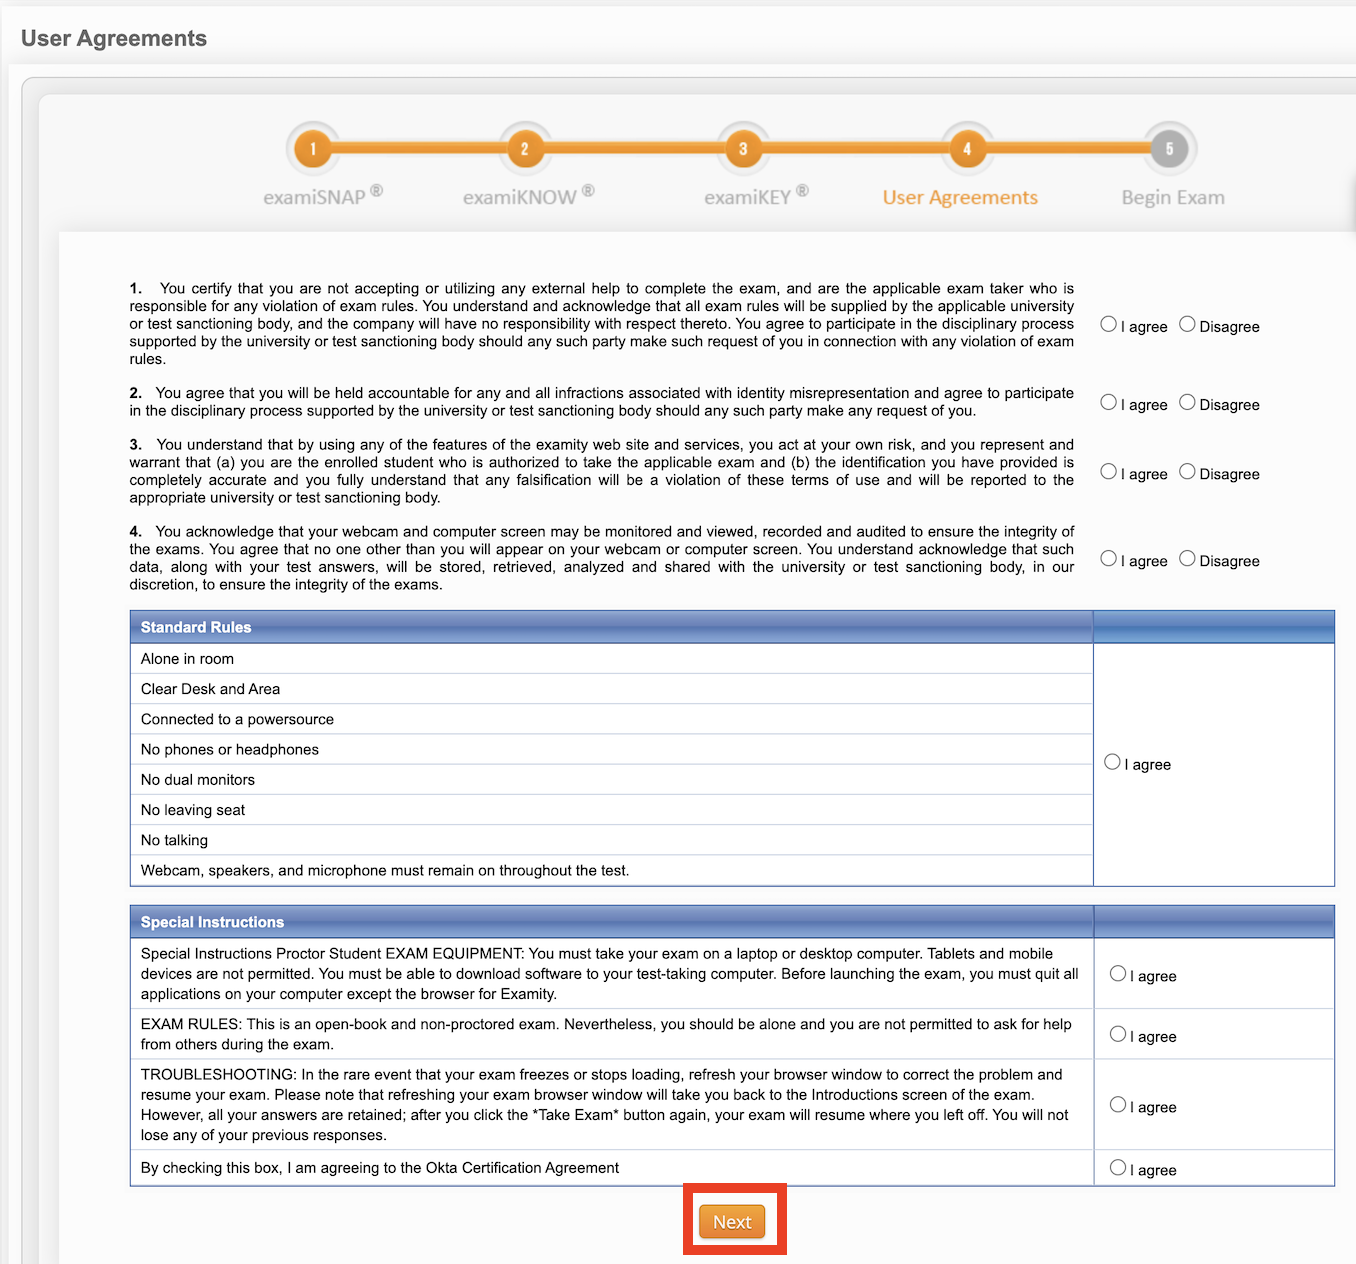 Image of the Exams Portal, featuring the User Agreement step, with a focus on the Next call to action button.